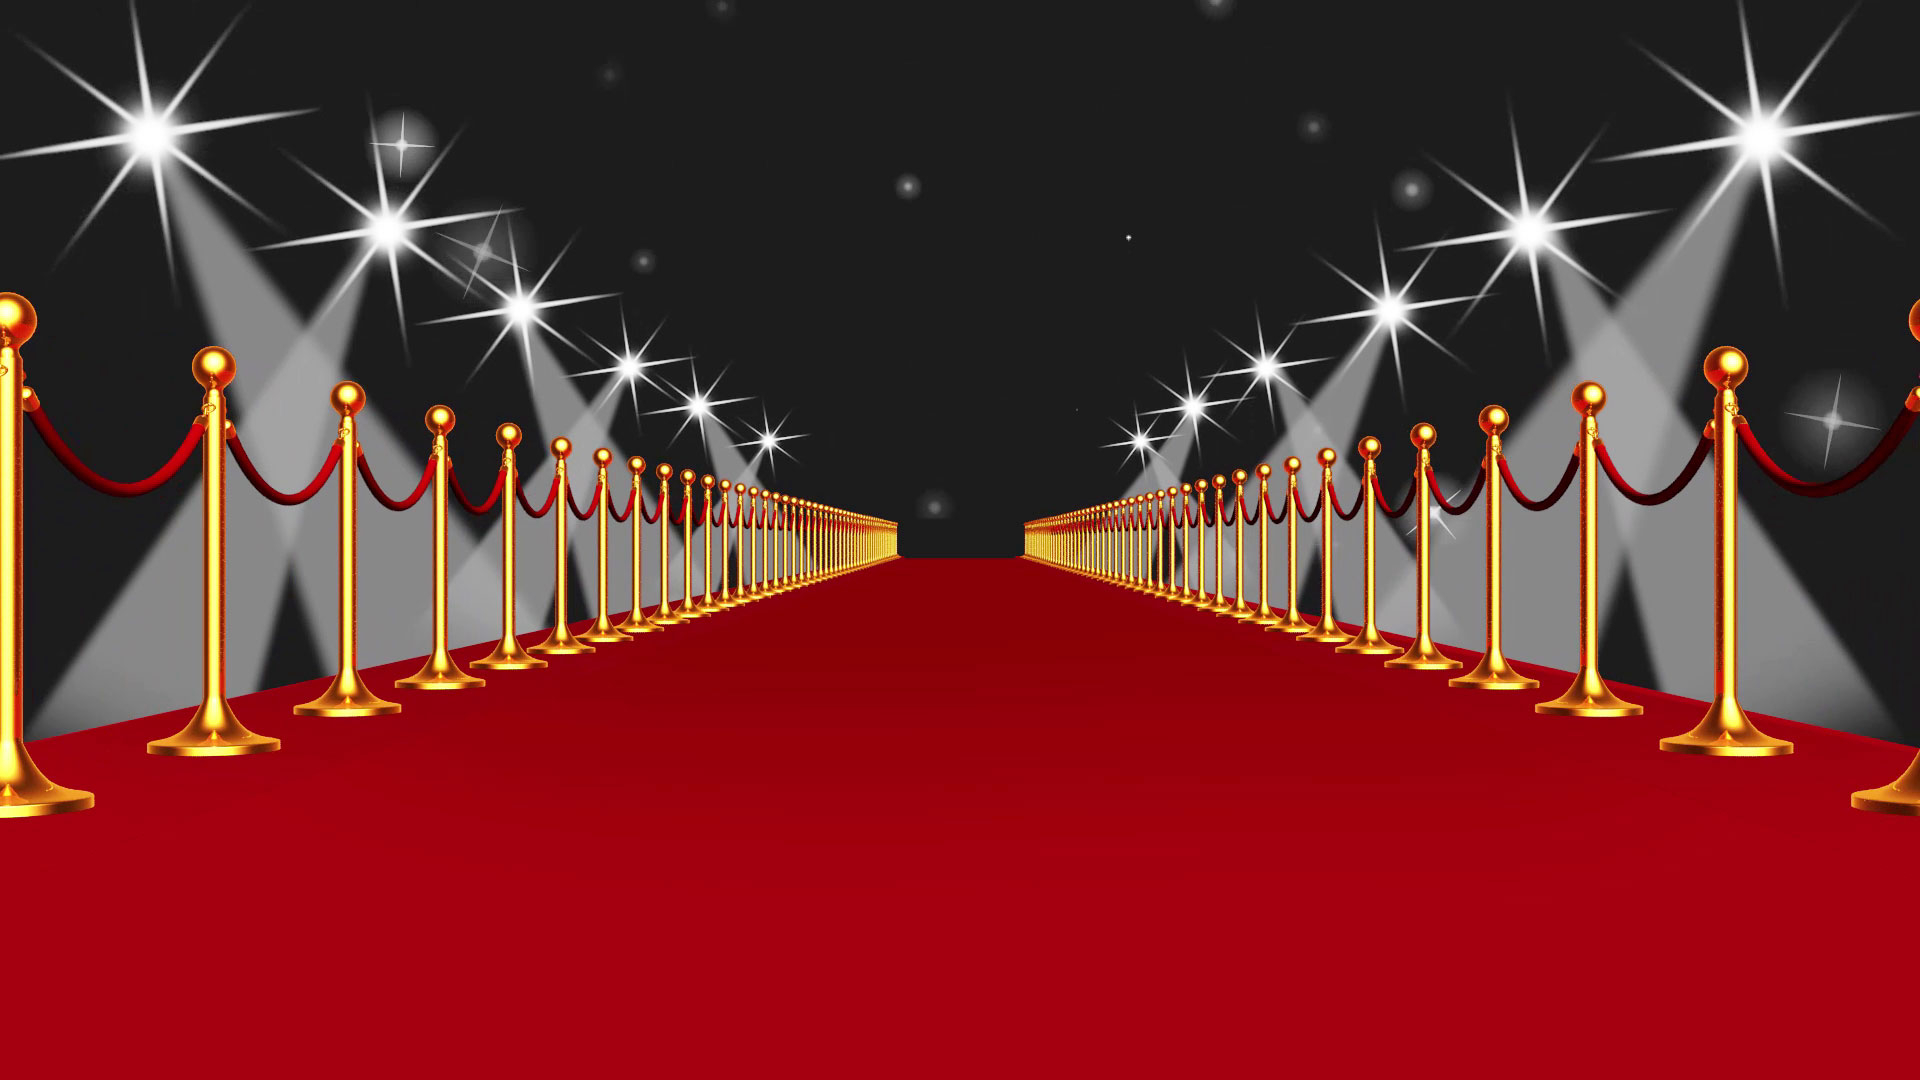 1920x1080 Red Carpet Event Walk with Spotlights Against Black Background | All Design Creative